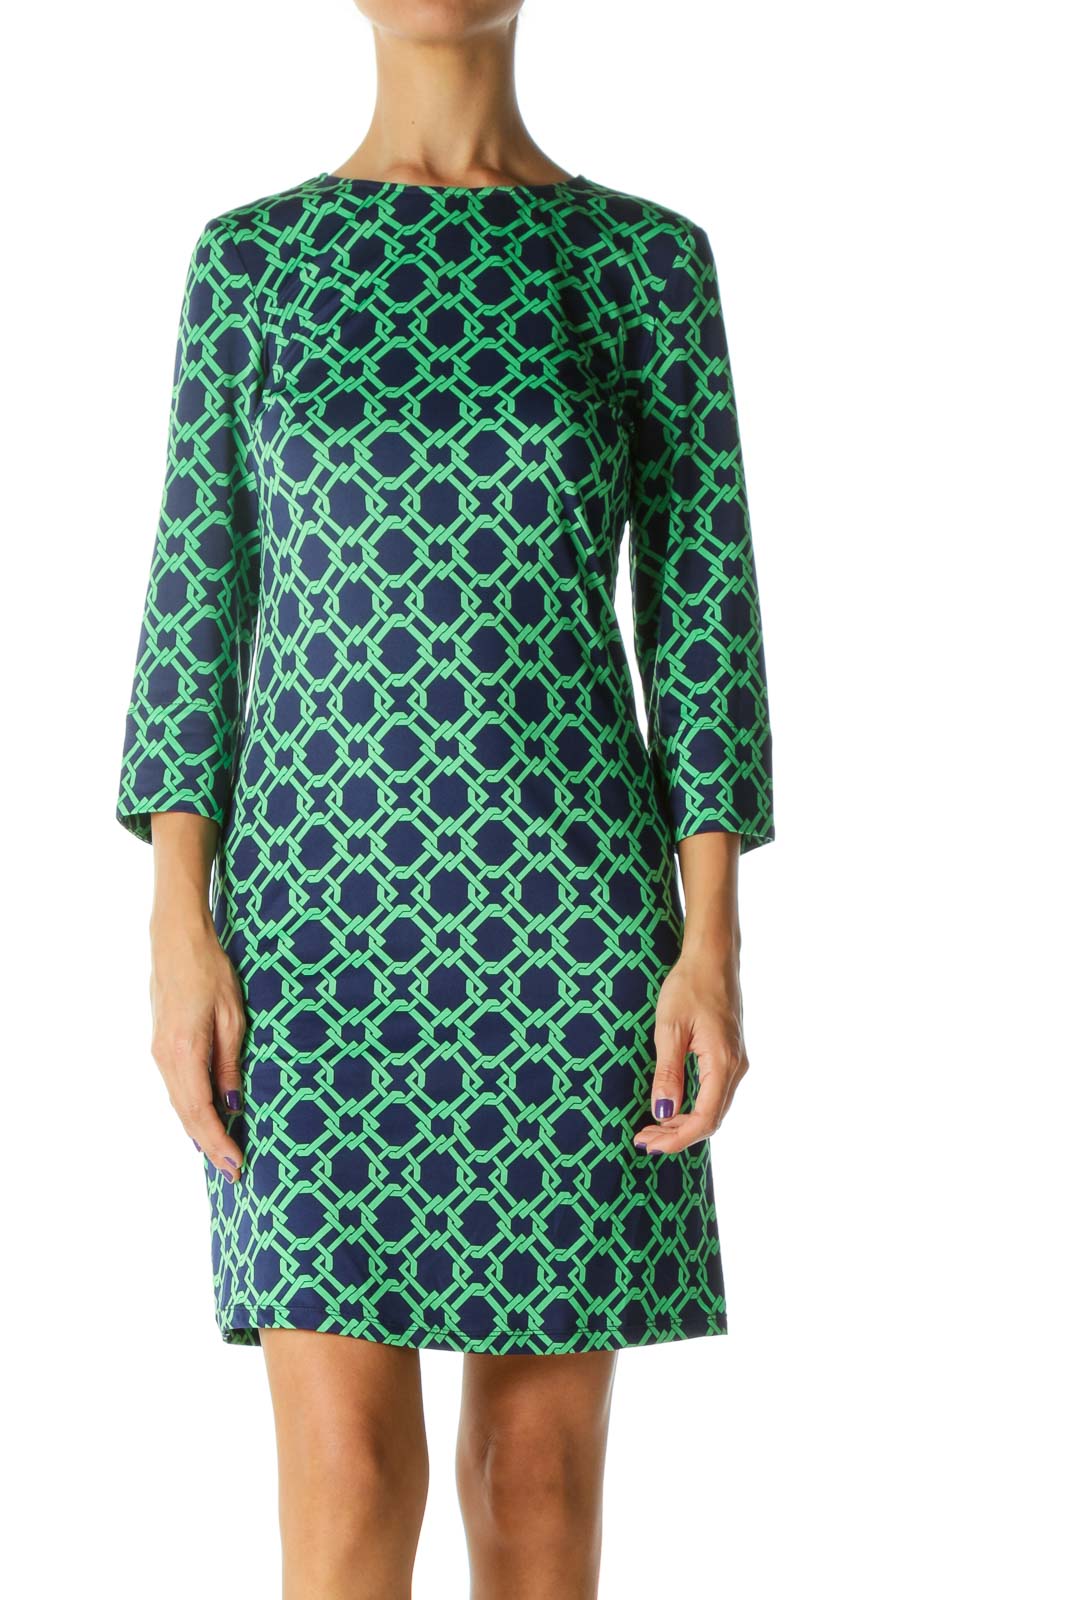 Blue Green Print 3/4 Sleeve Stretch Thin Day Dress Front